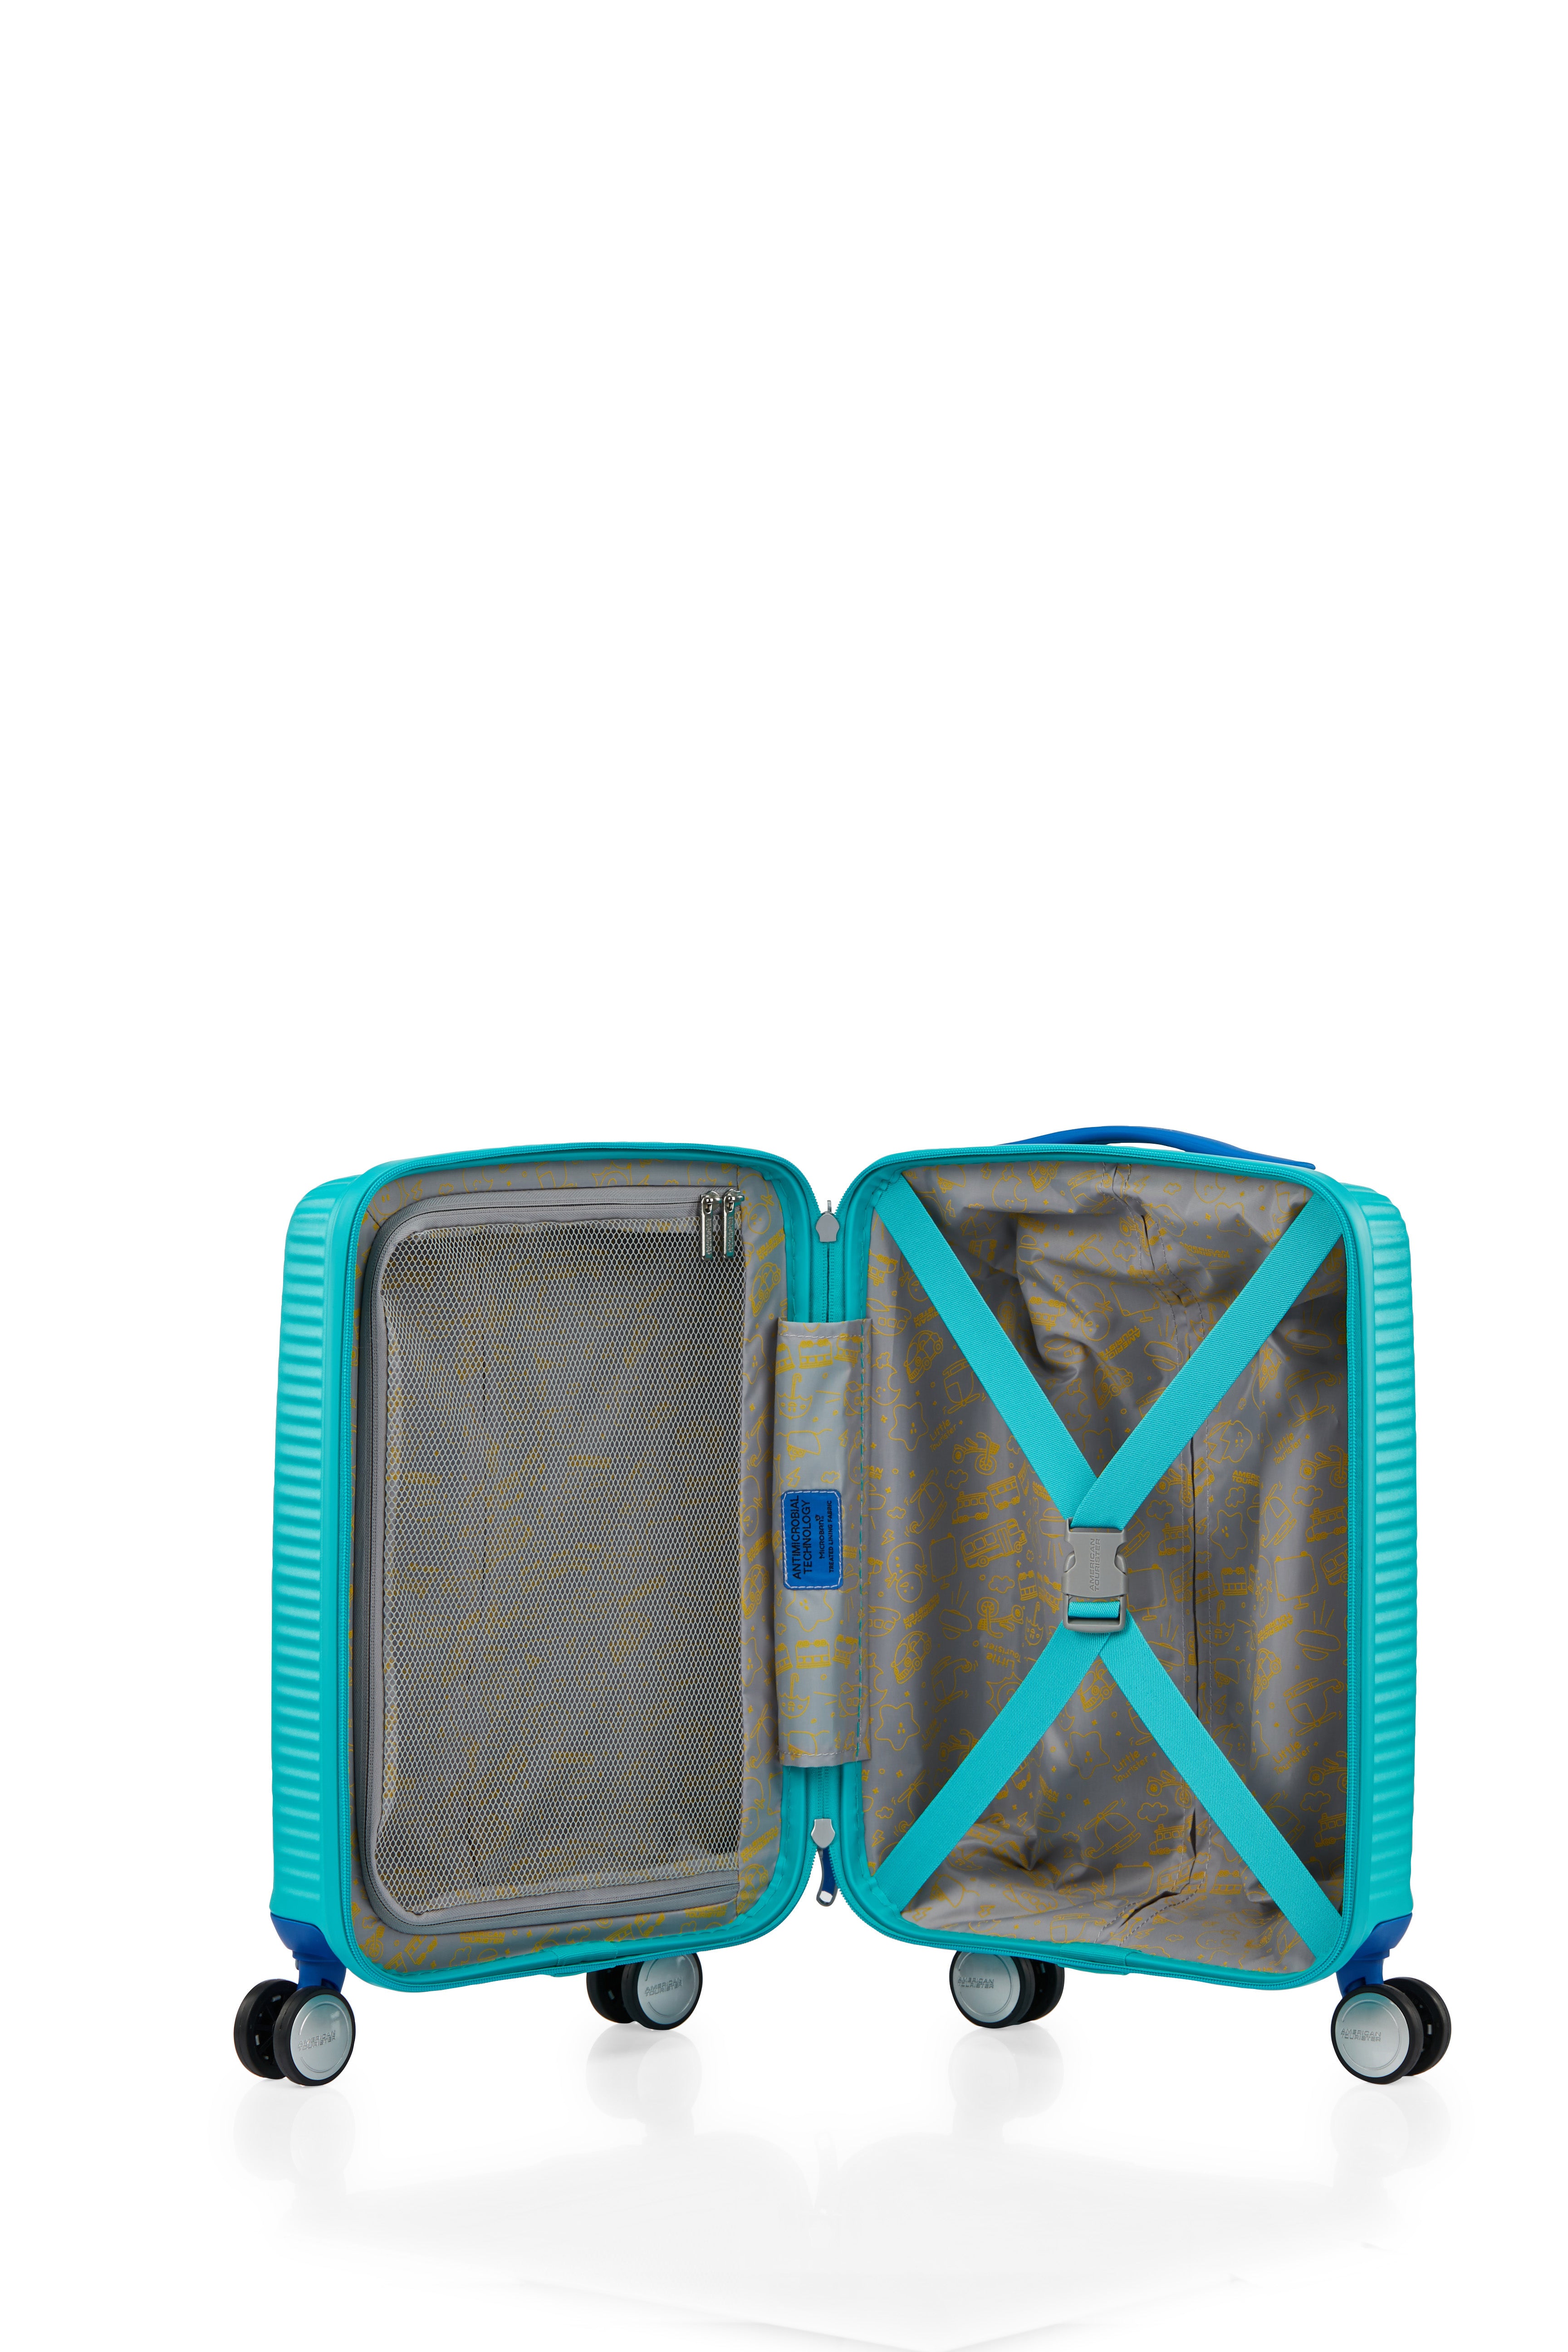 American Tourister - Little Curio 47cm Spinner - Teal/Blue-6